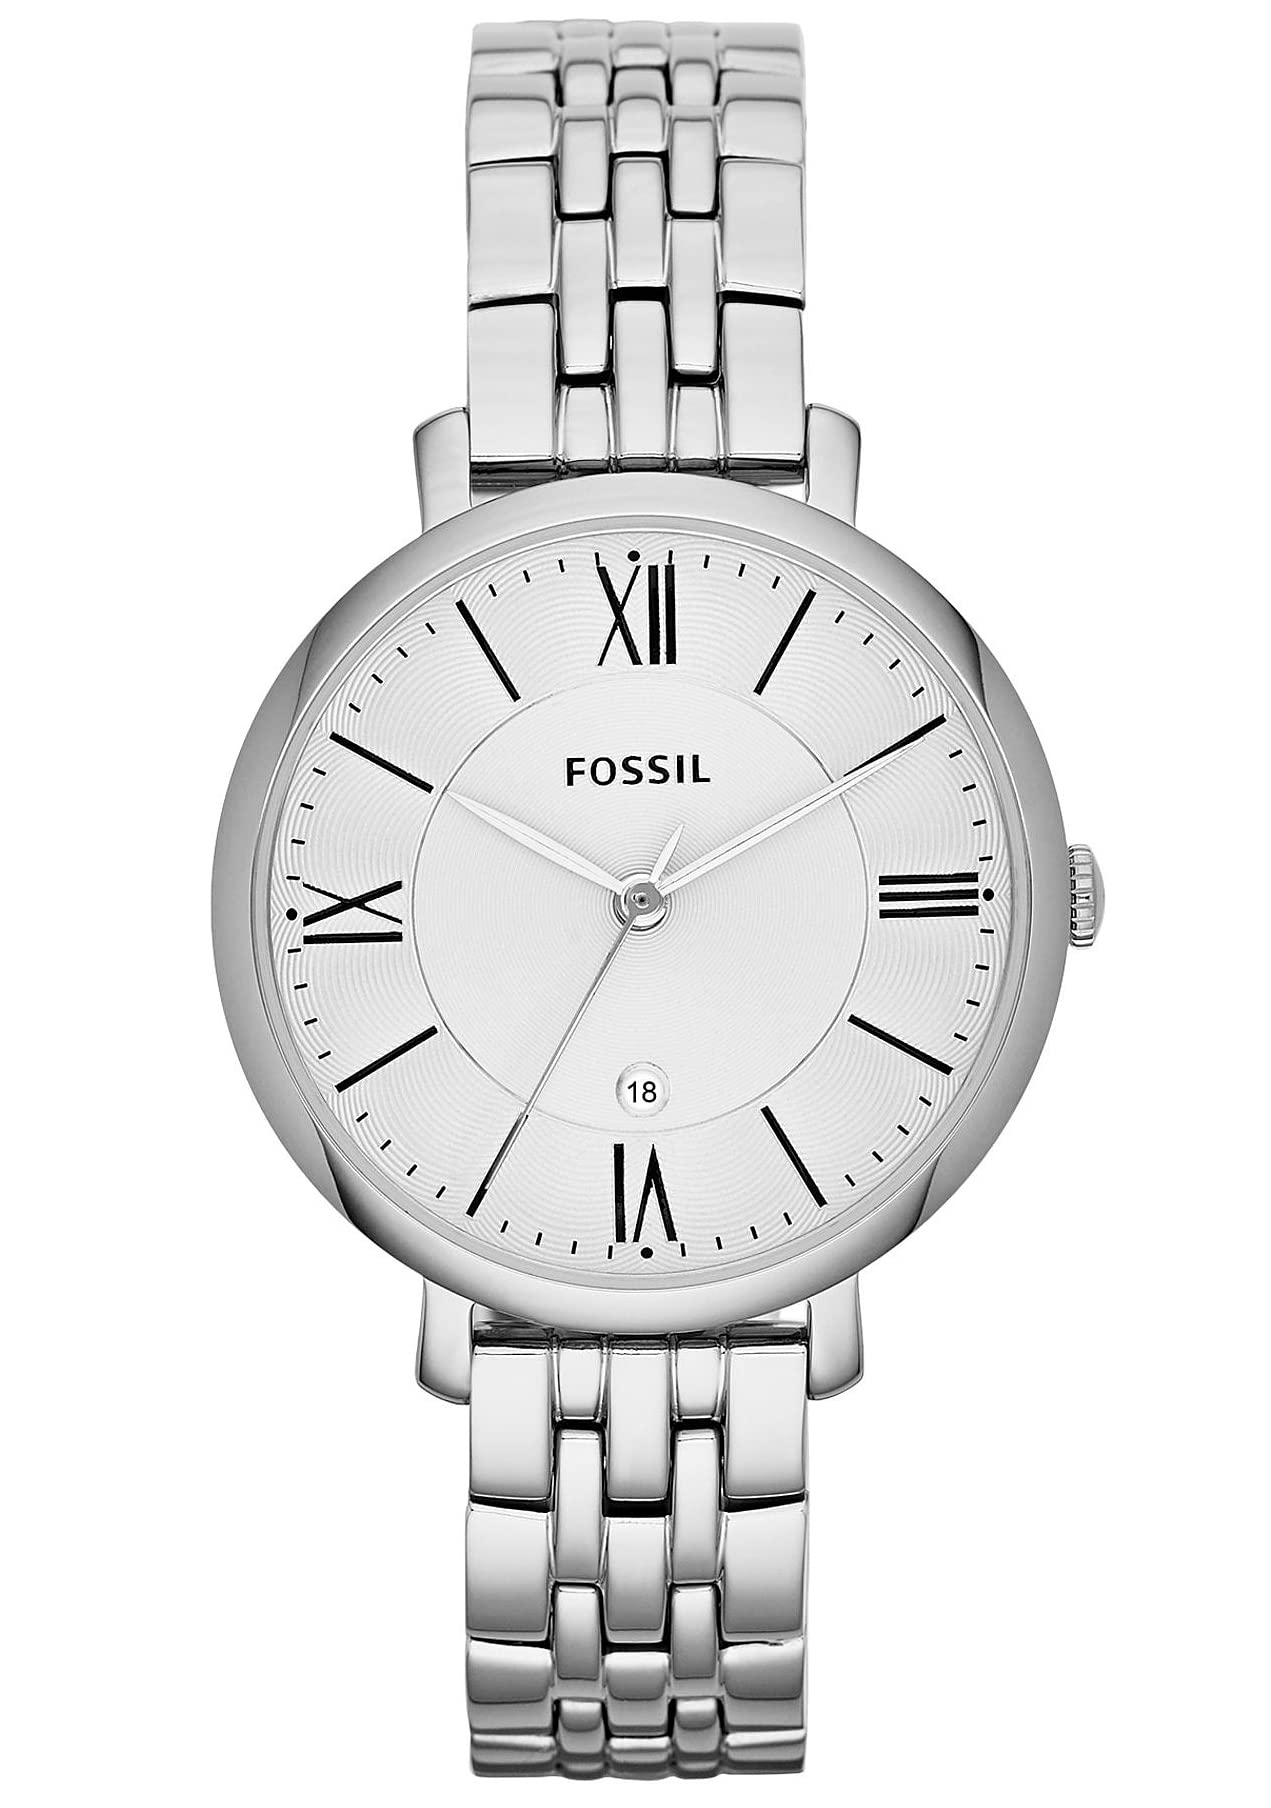 Fossil Jacqueline Women's Watch with Stainless Steel or Leather Band, Analog Watch Display